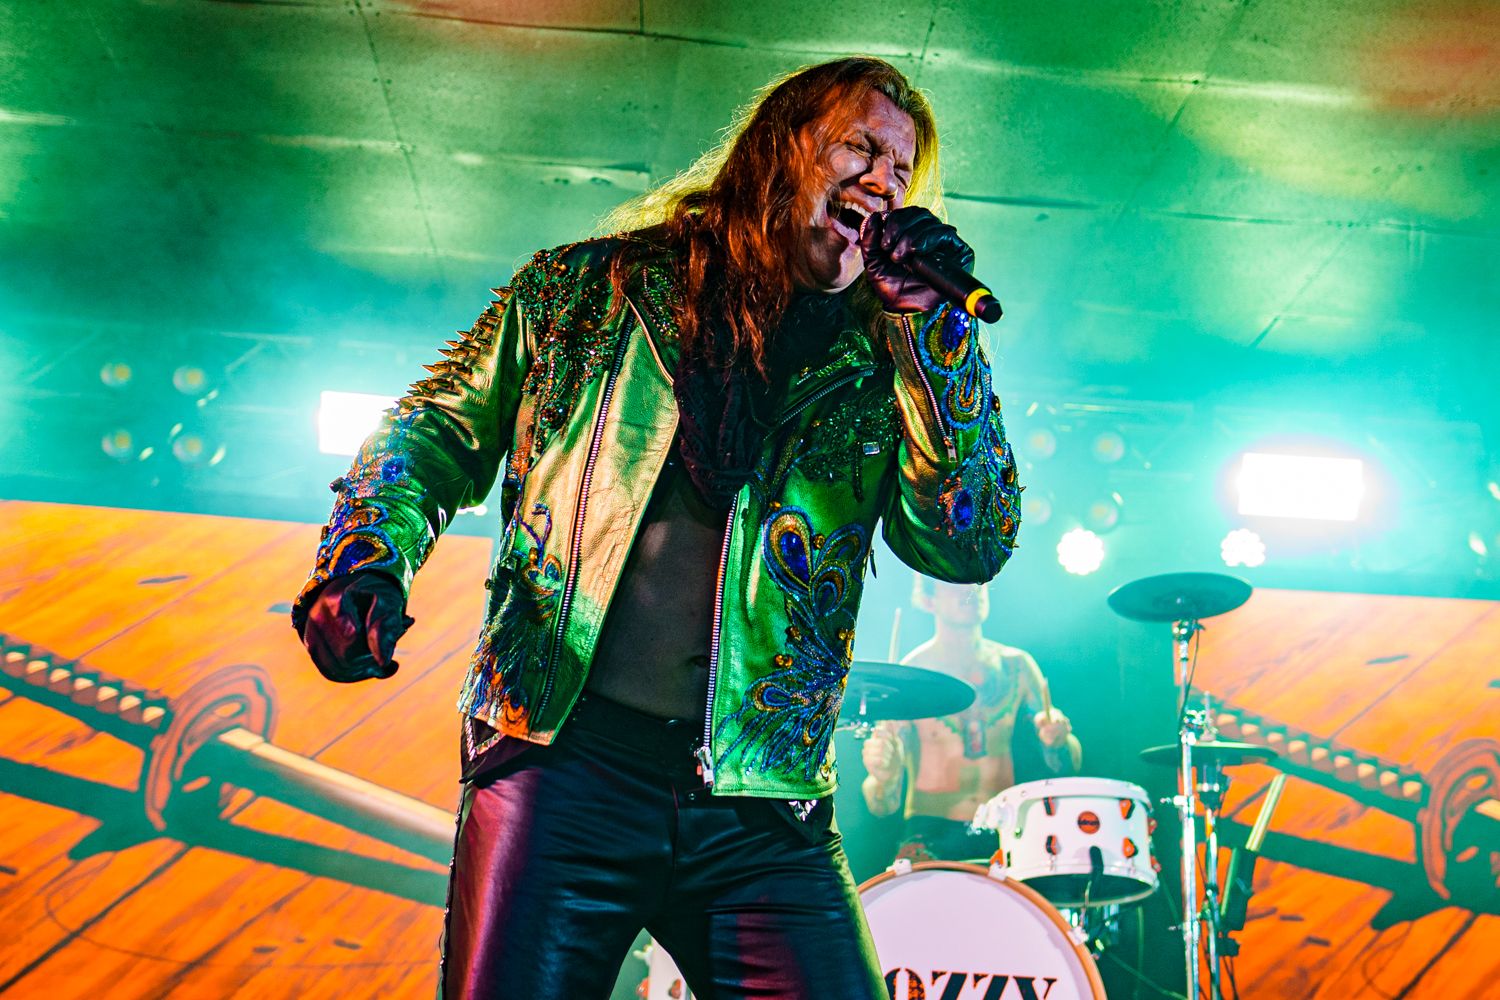 Fozzy's 'Save the World' Tour Rocks The Rave